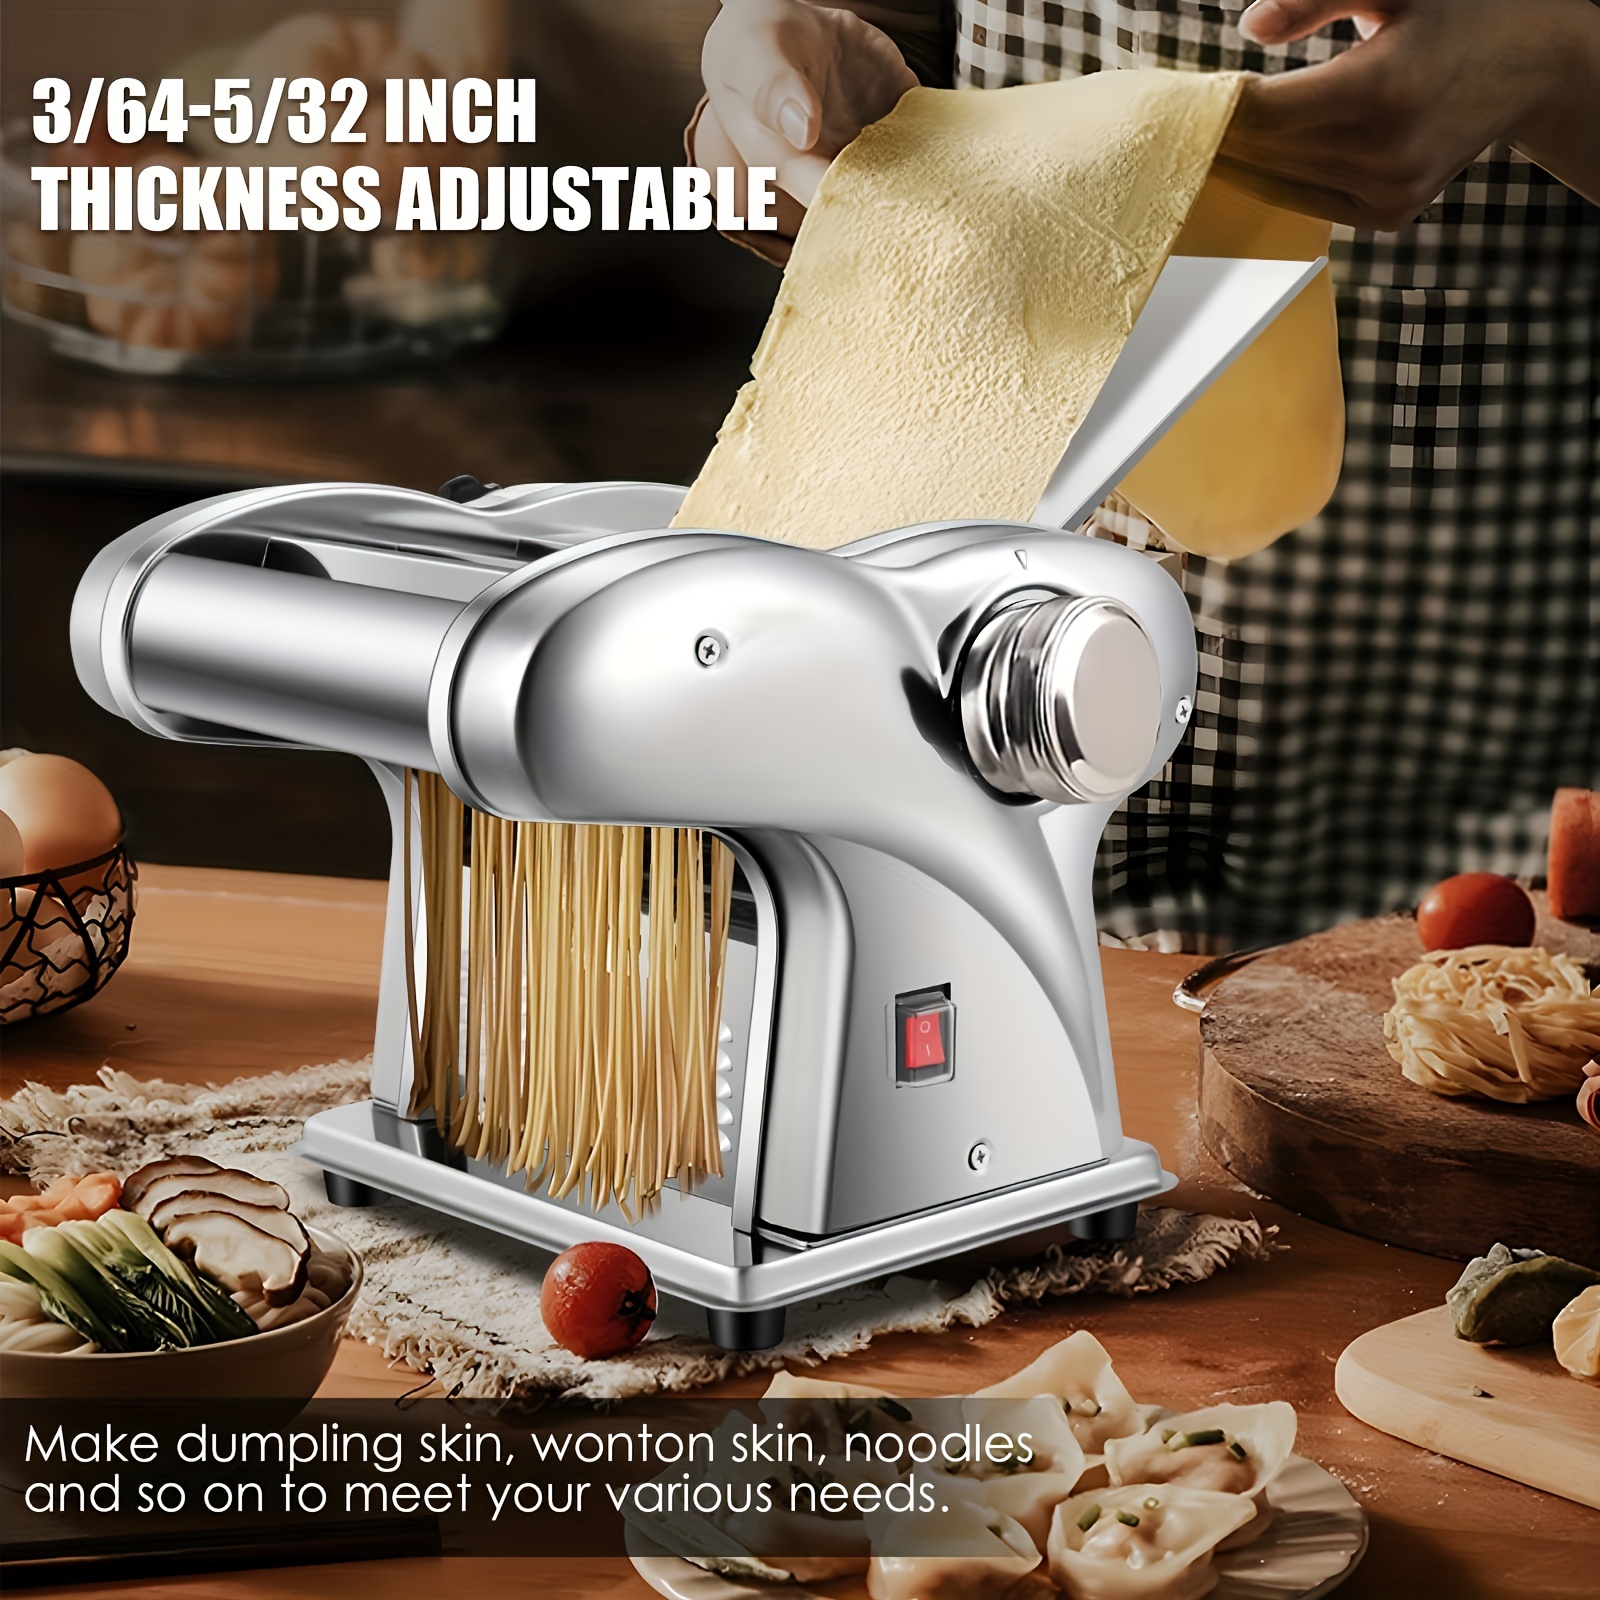 Pasta Maker Machine, Roller Pasta Maker, Adjustable Thickness Settings,  Manual Noodles Maker With Removable Handle, Perfect For Homemade Pasta,  Lasagna, Spaghetti Or Fettuccine, Kitchen Utensils, Kitchen Supplies, Back  To School Supplies 